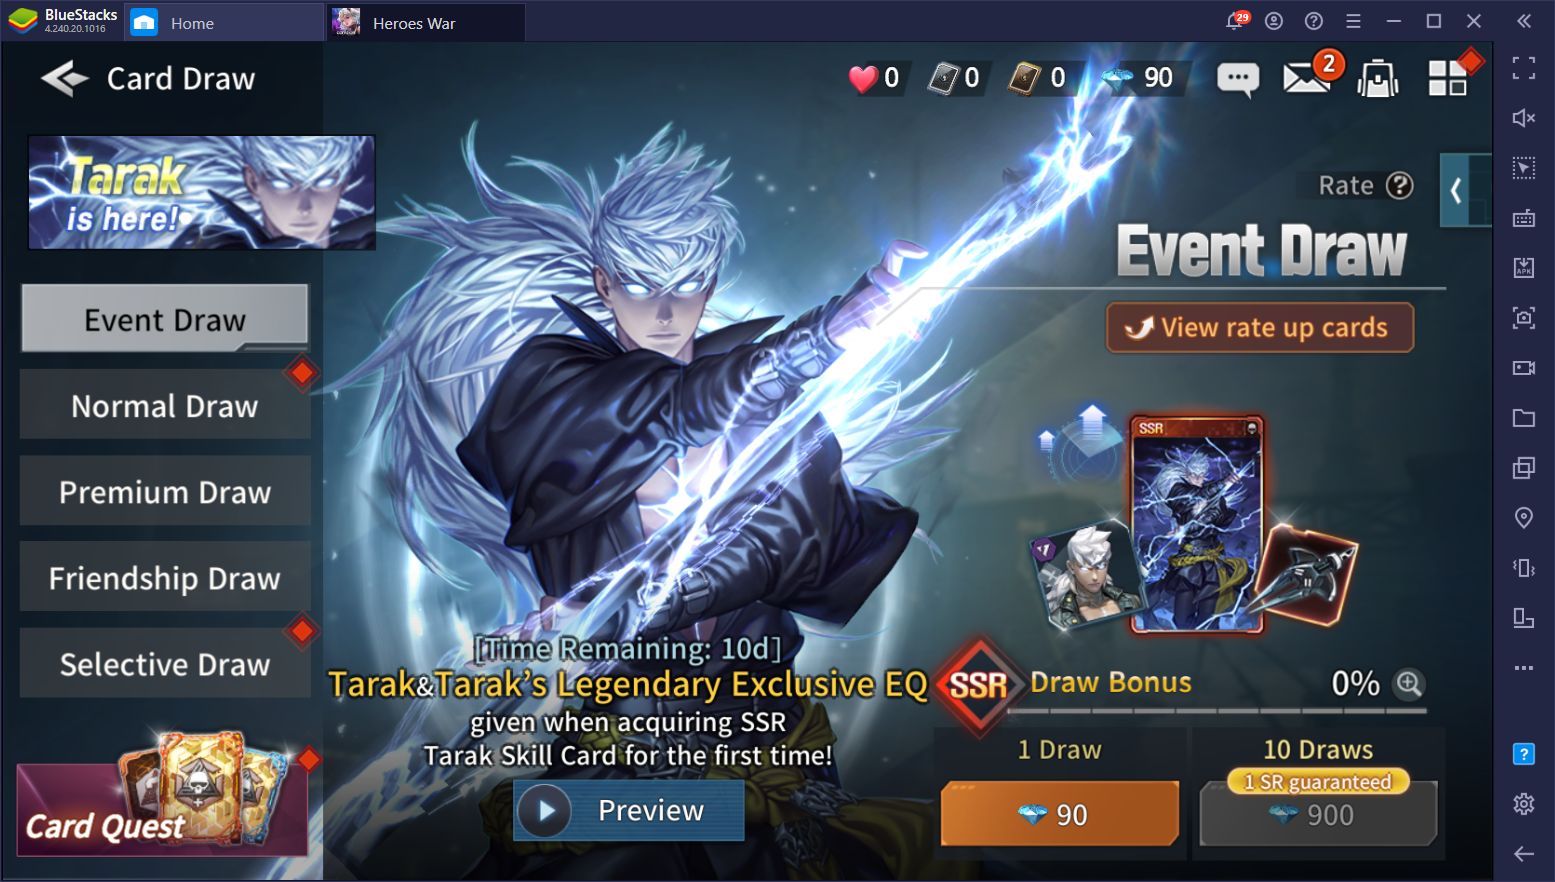 Heroes War: Counterattack on PC – How to Use BlueStacks for Easy Rerolls and Improved Controls